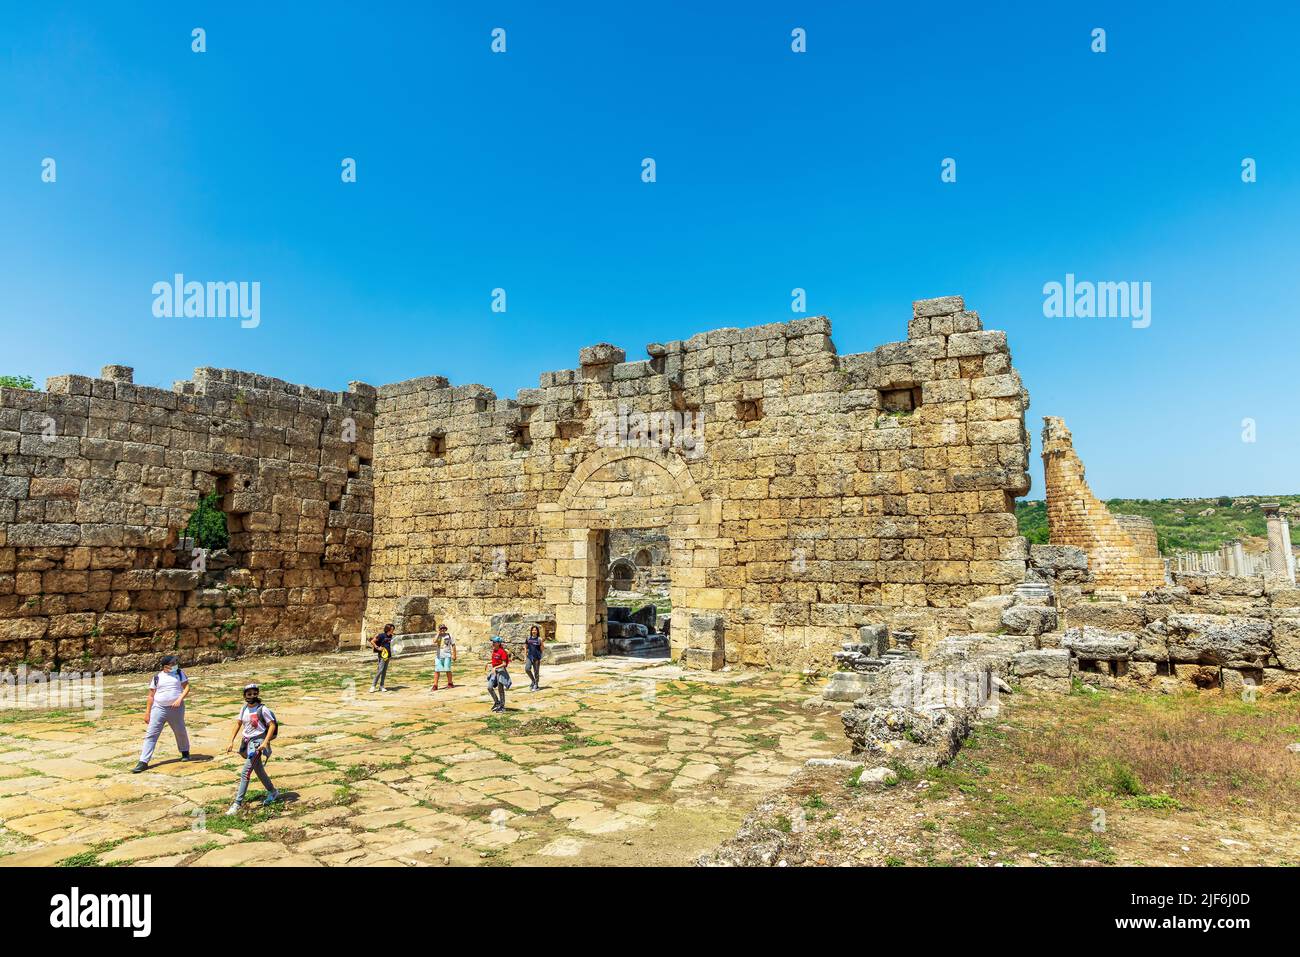 Popular tourist destination ruins of Perge, an ancient Greek city in Anatolia, now in Antalya Province of Turkey. Stock Photo